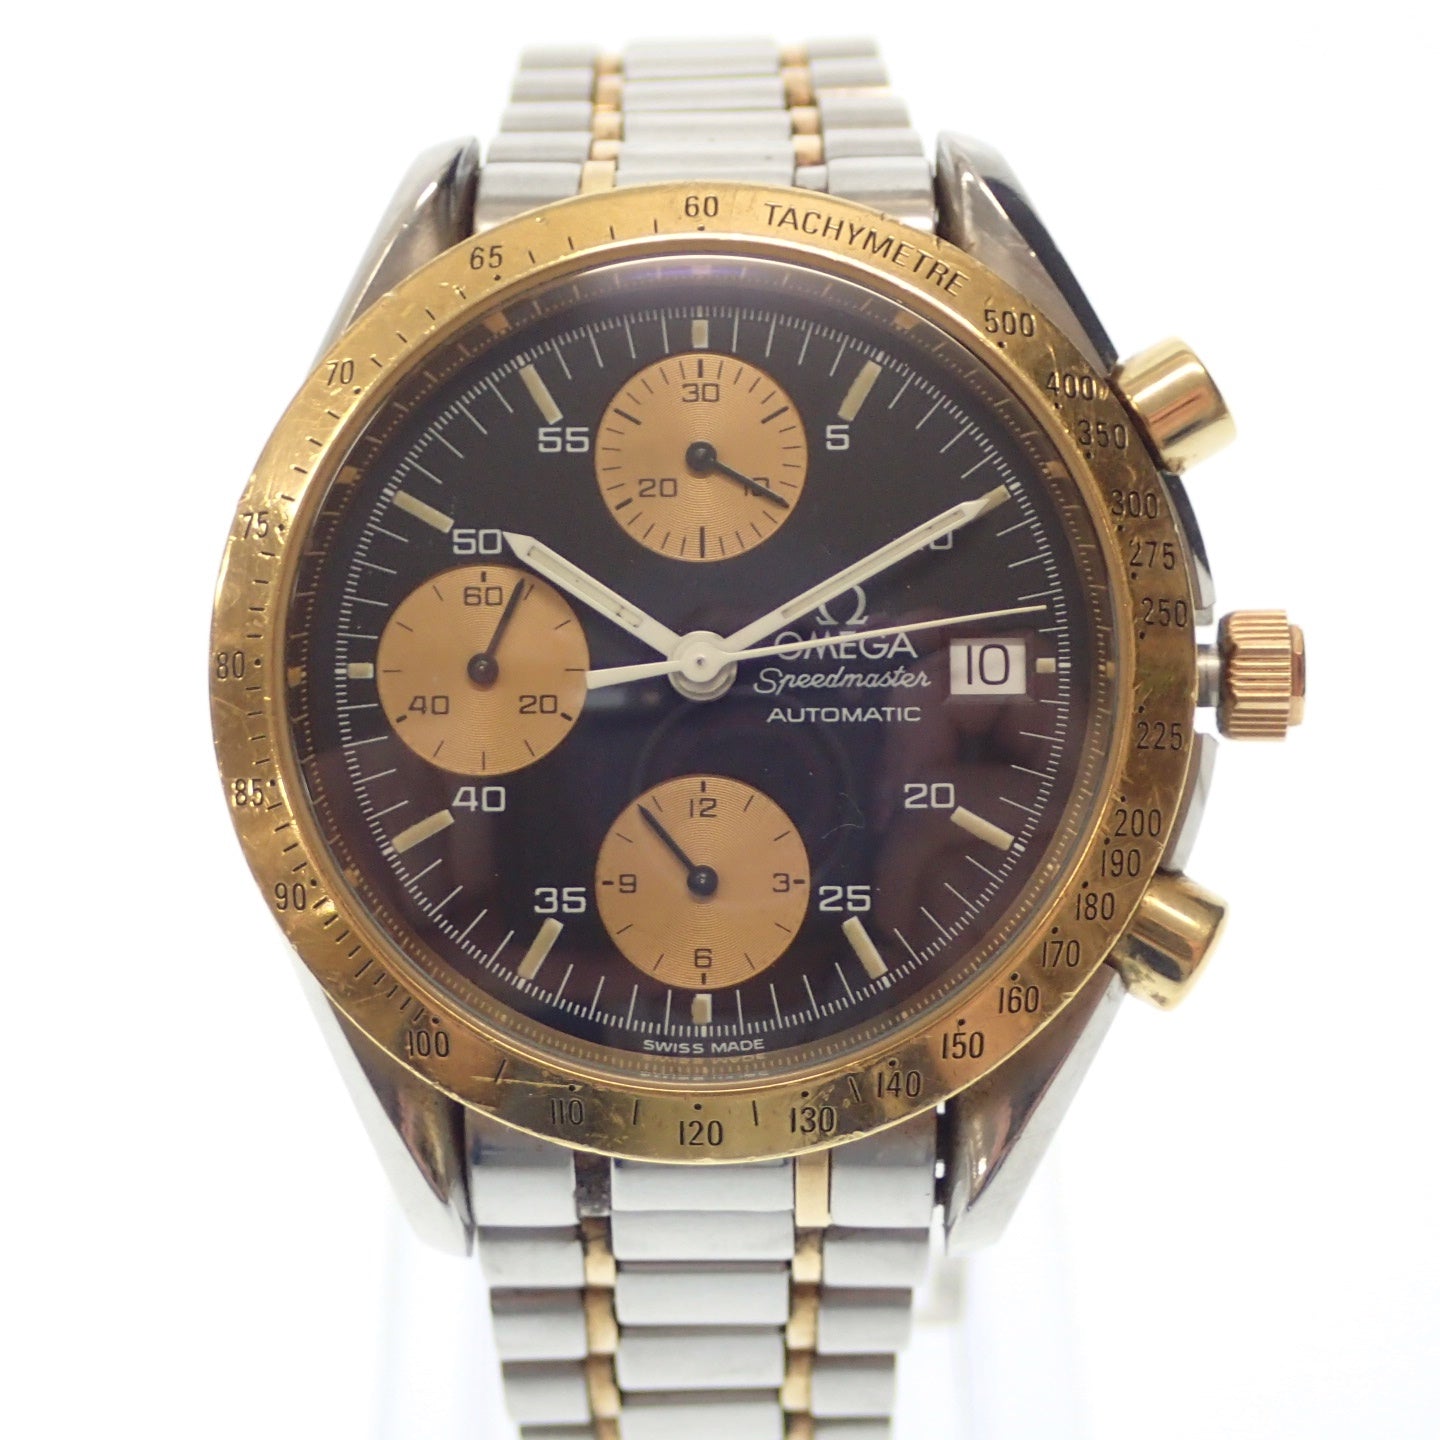 Used ◆ Omega watch Speedmaster 3316.50 automatic winding black dial silver x gold with box OMEGA [AFI18] 